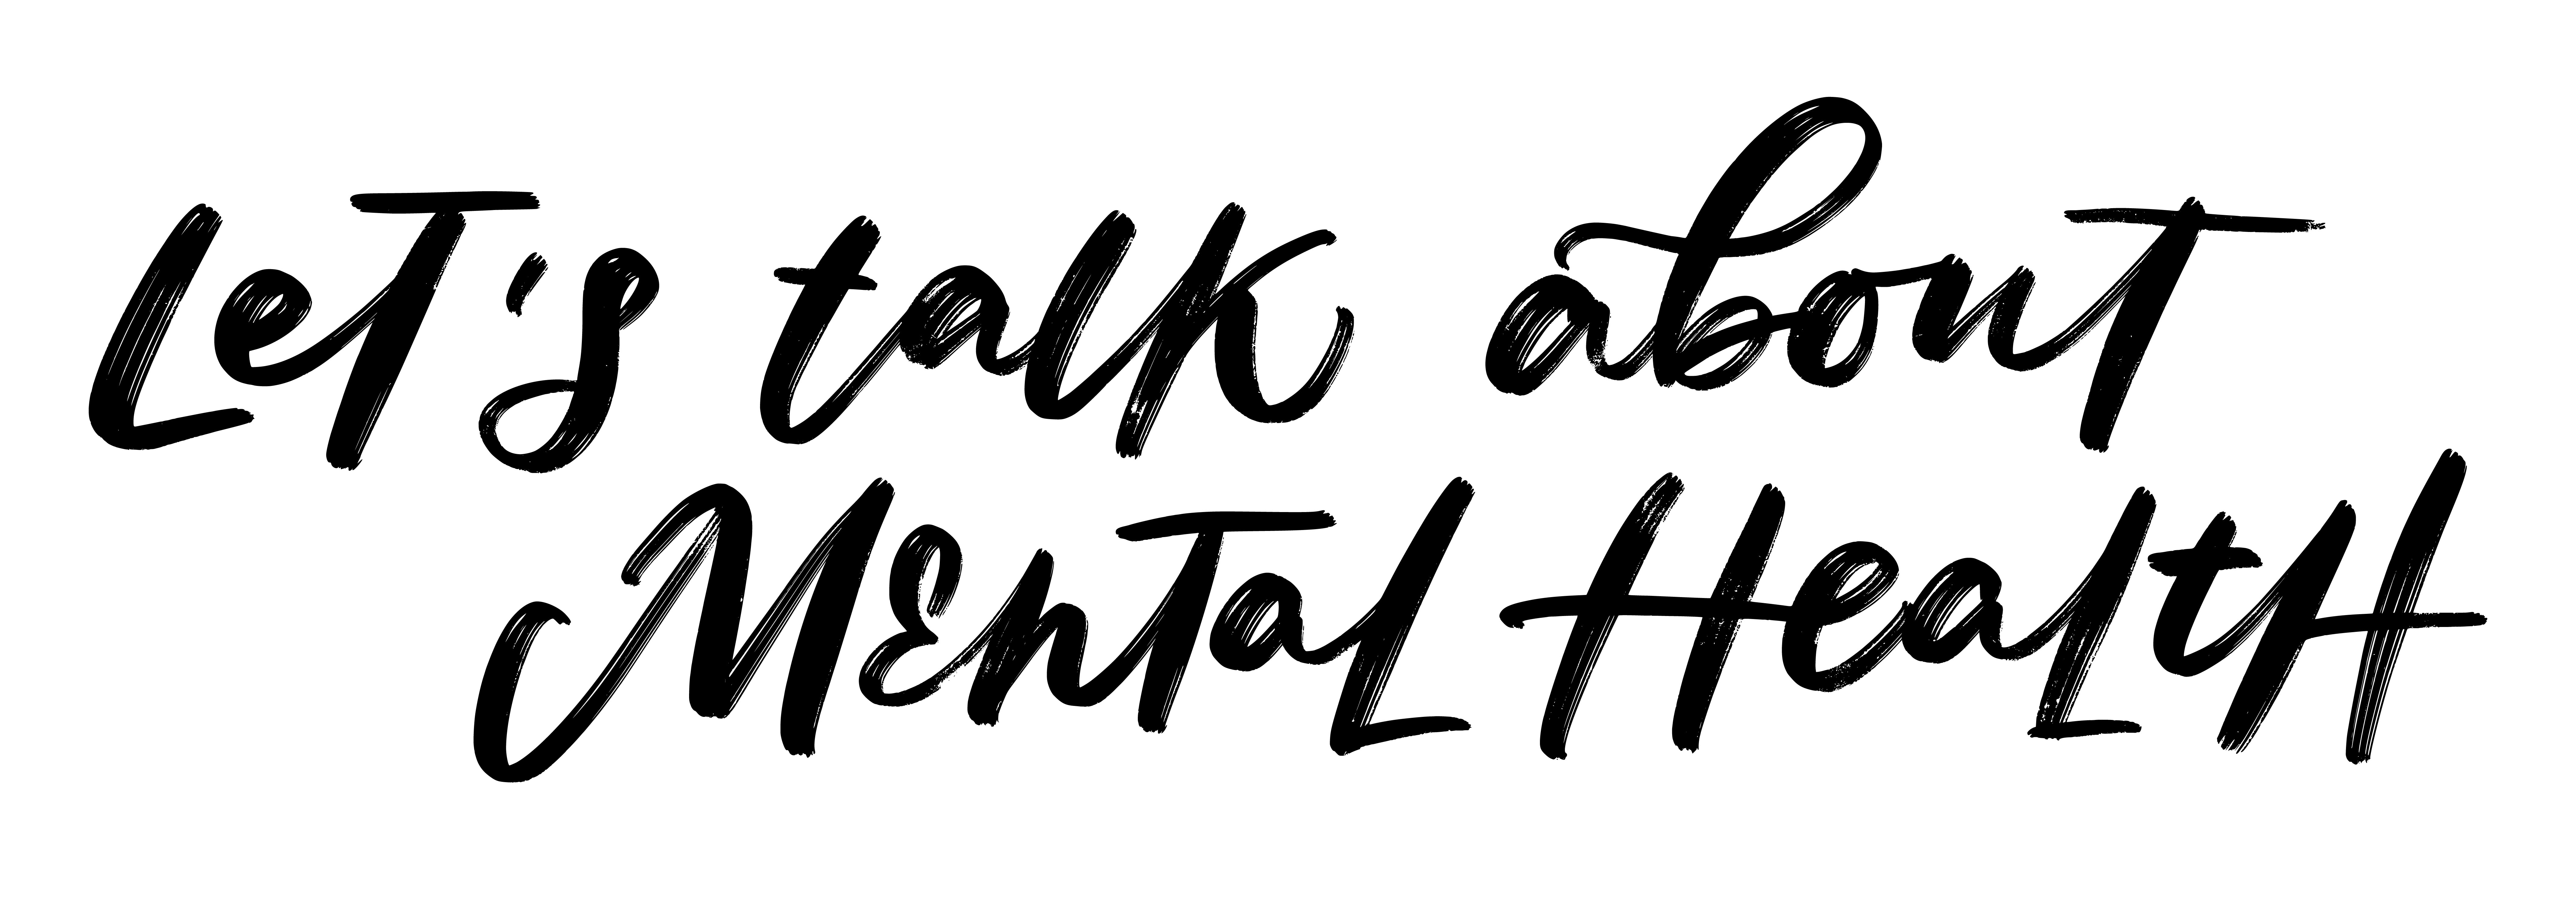 Building a better outlook for mental health